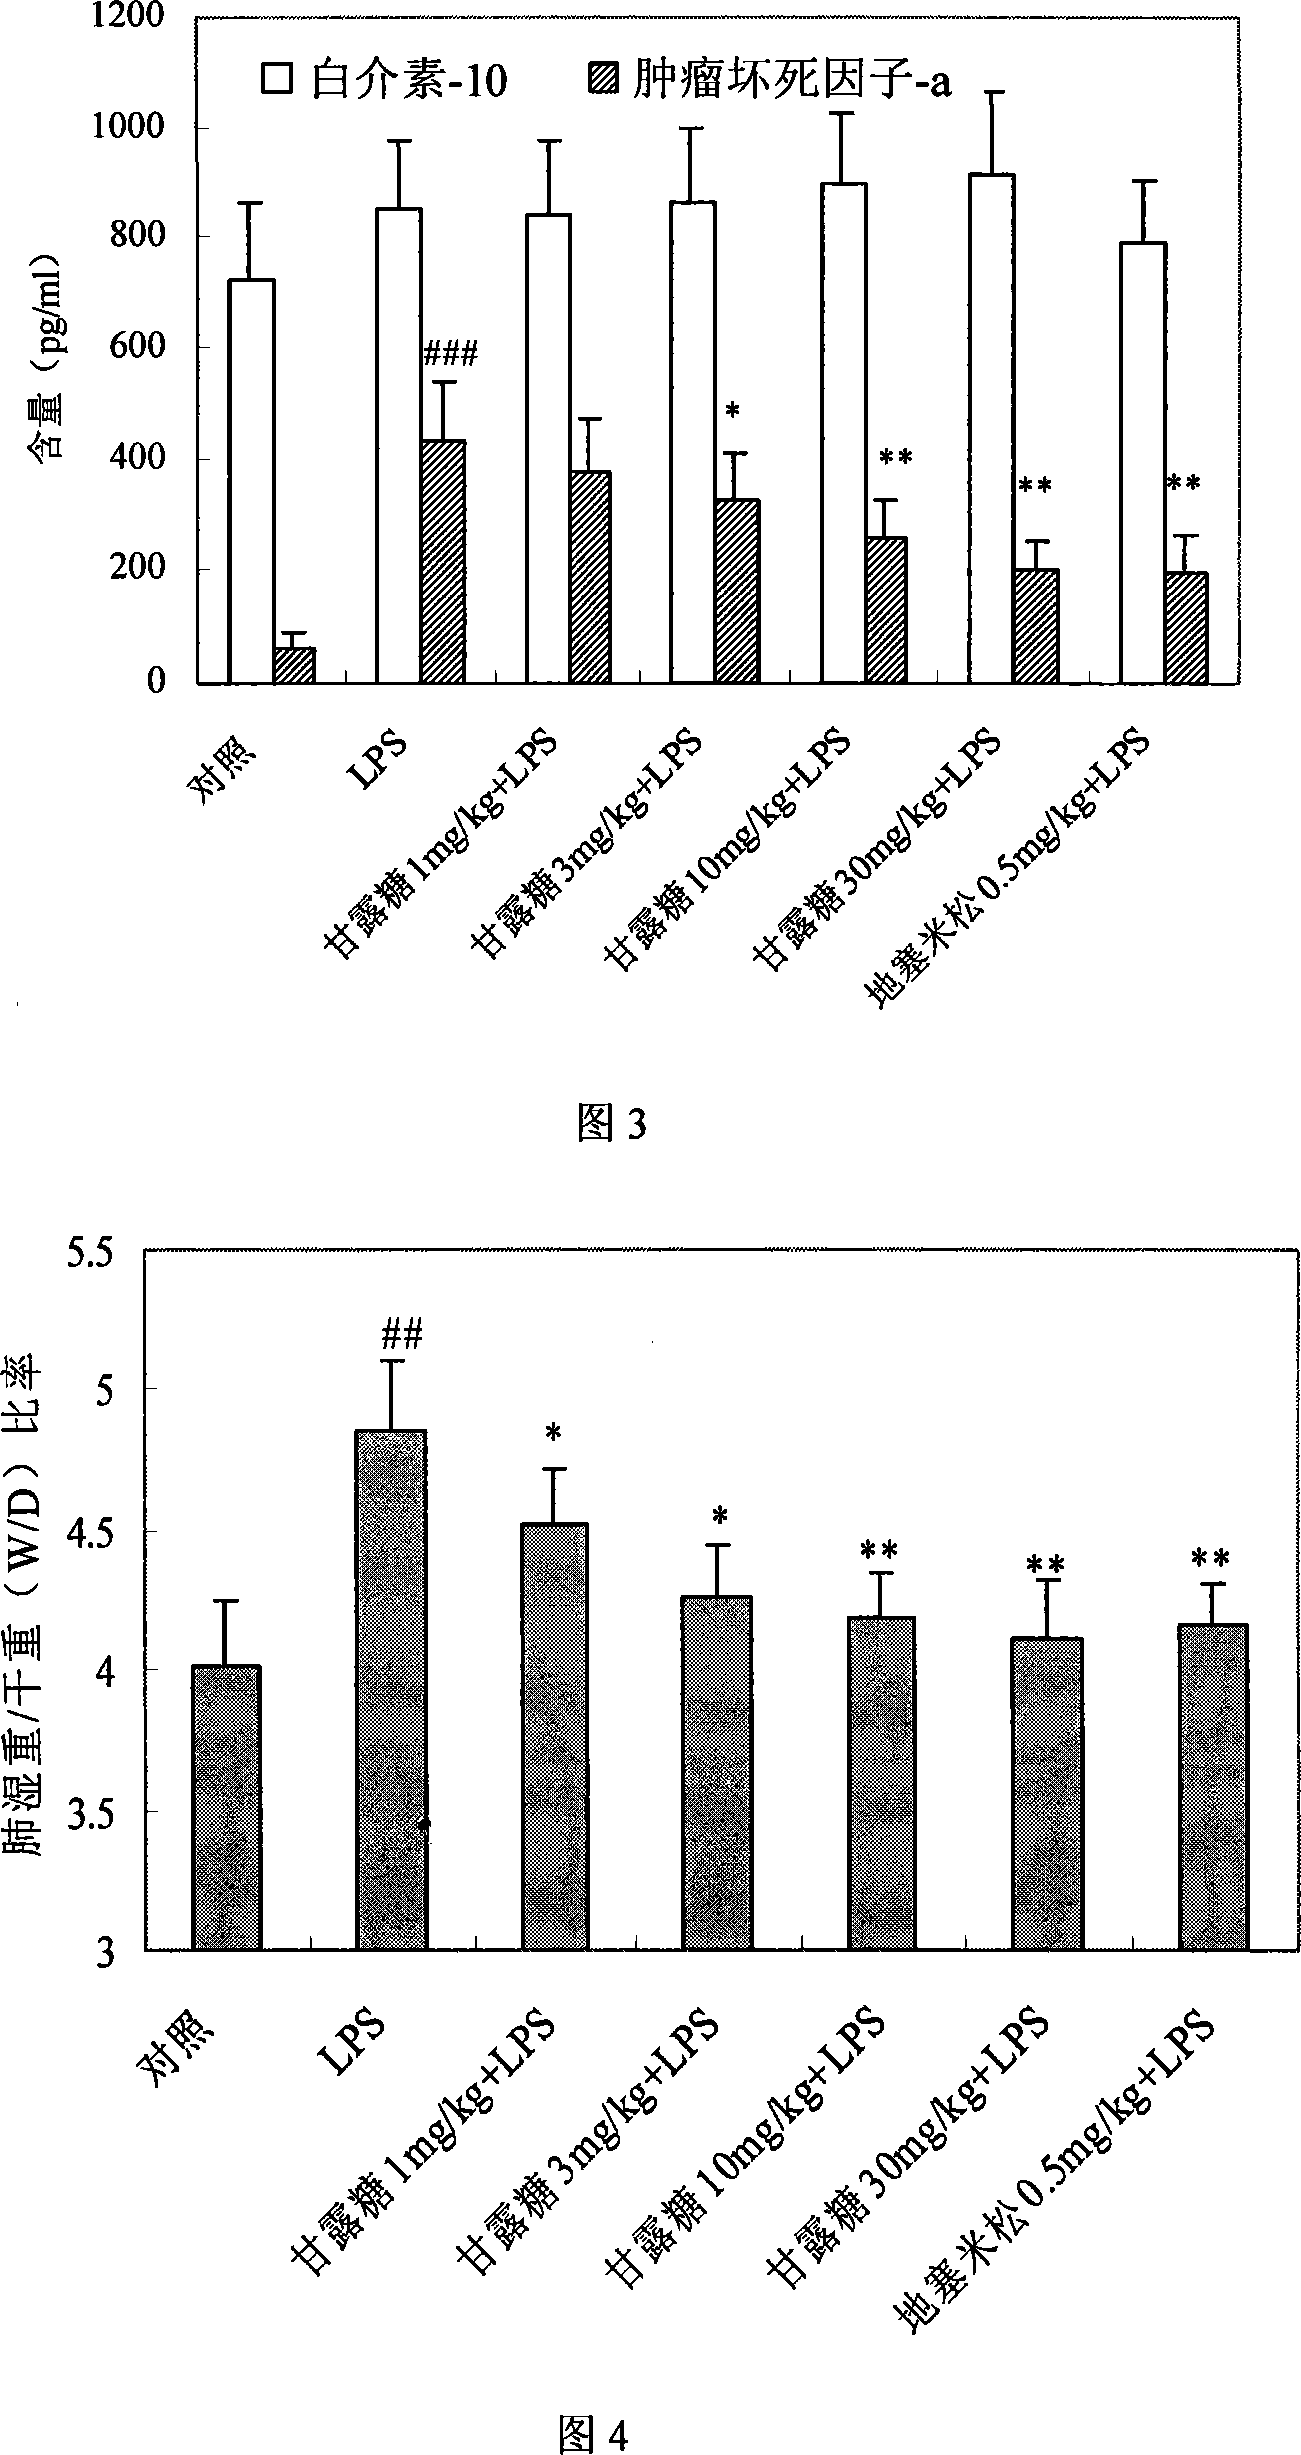 Application of mannose in the preparation of medicine for treating pulmonary inflammation disease